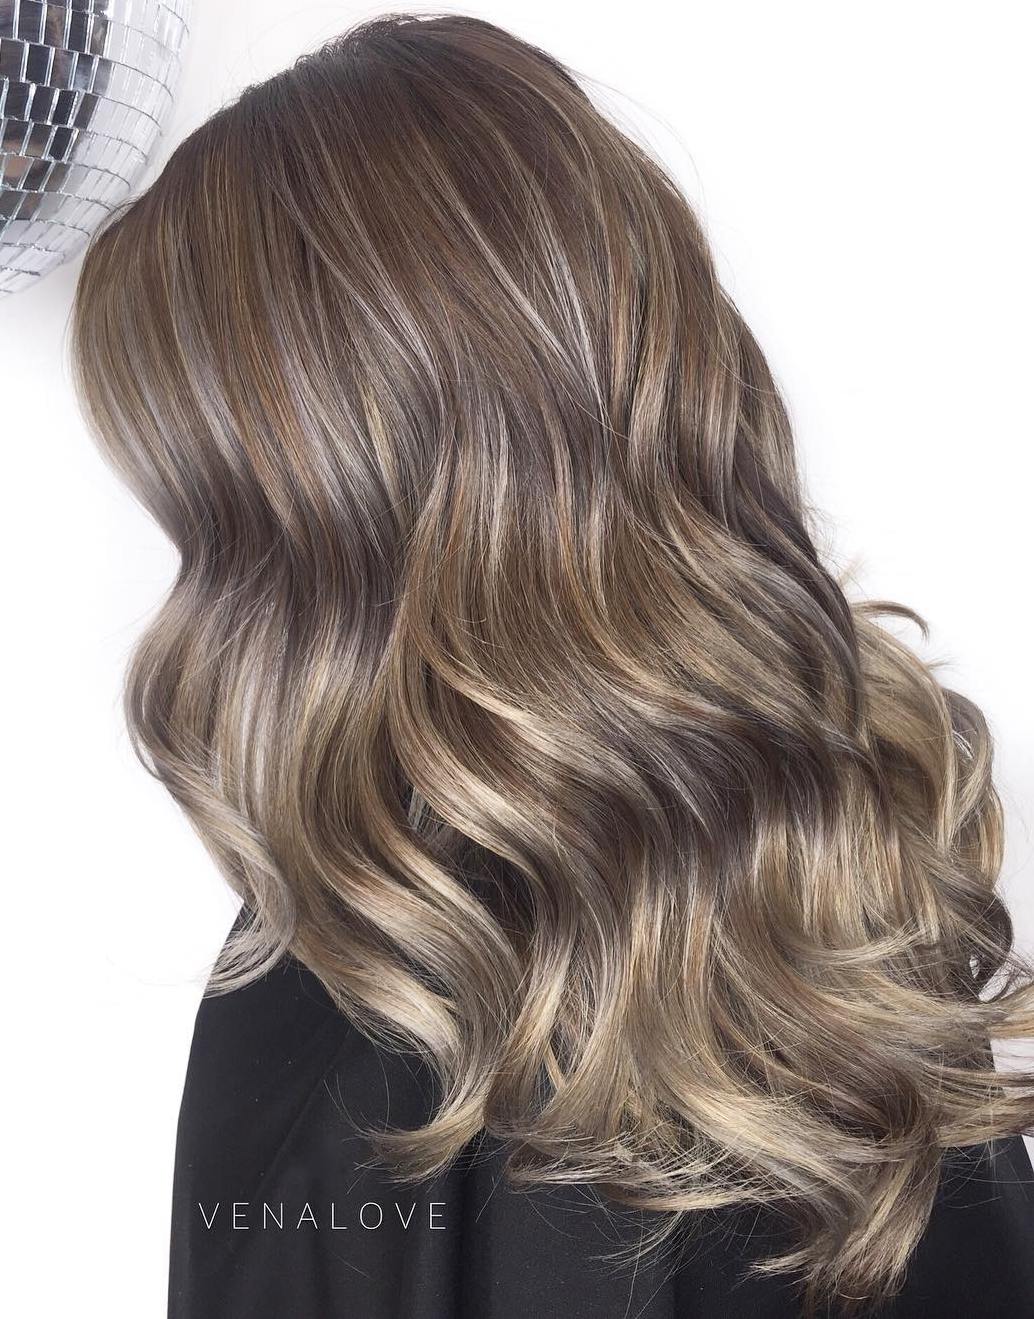 Brown Hair With Subtle Silver Highlights